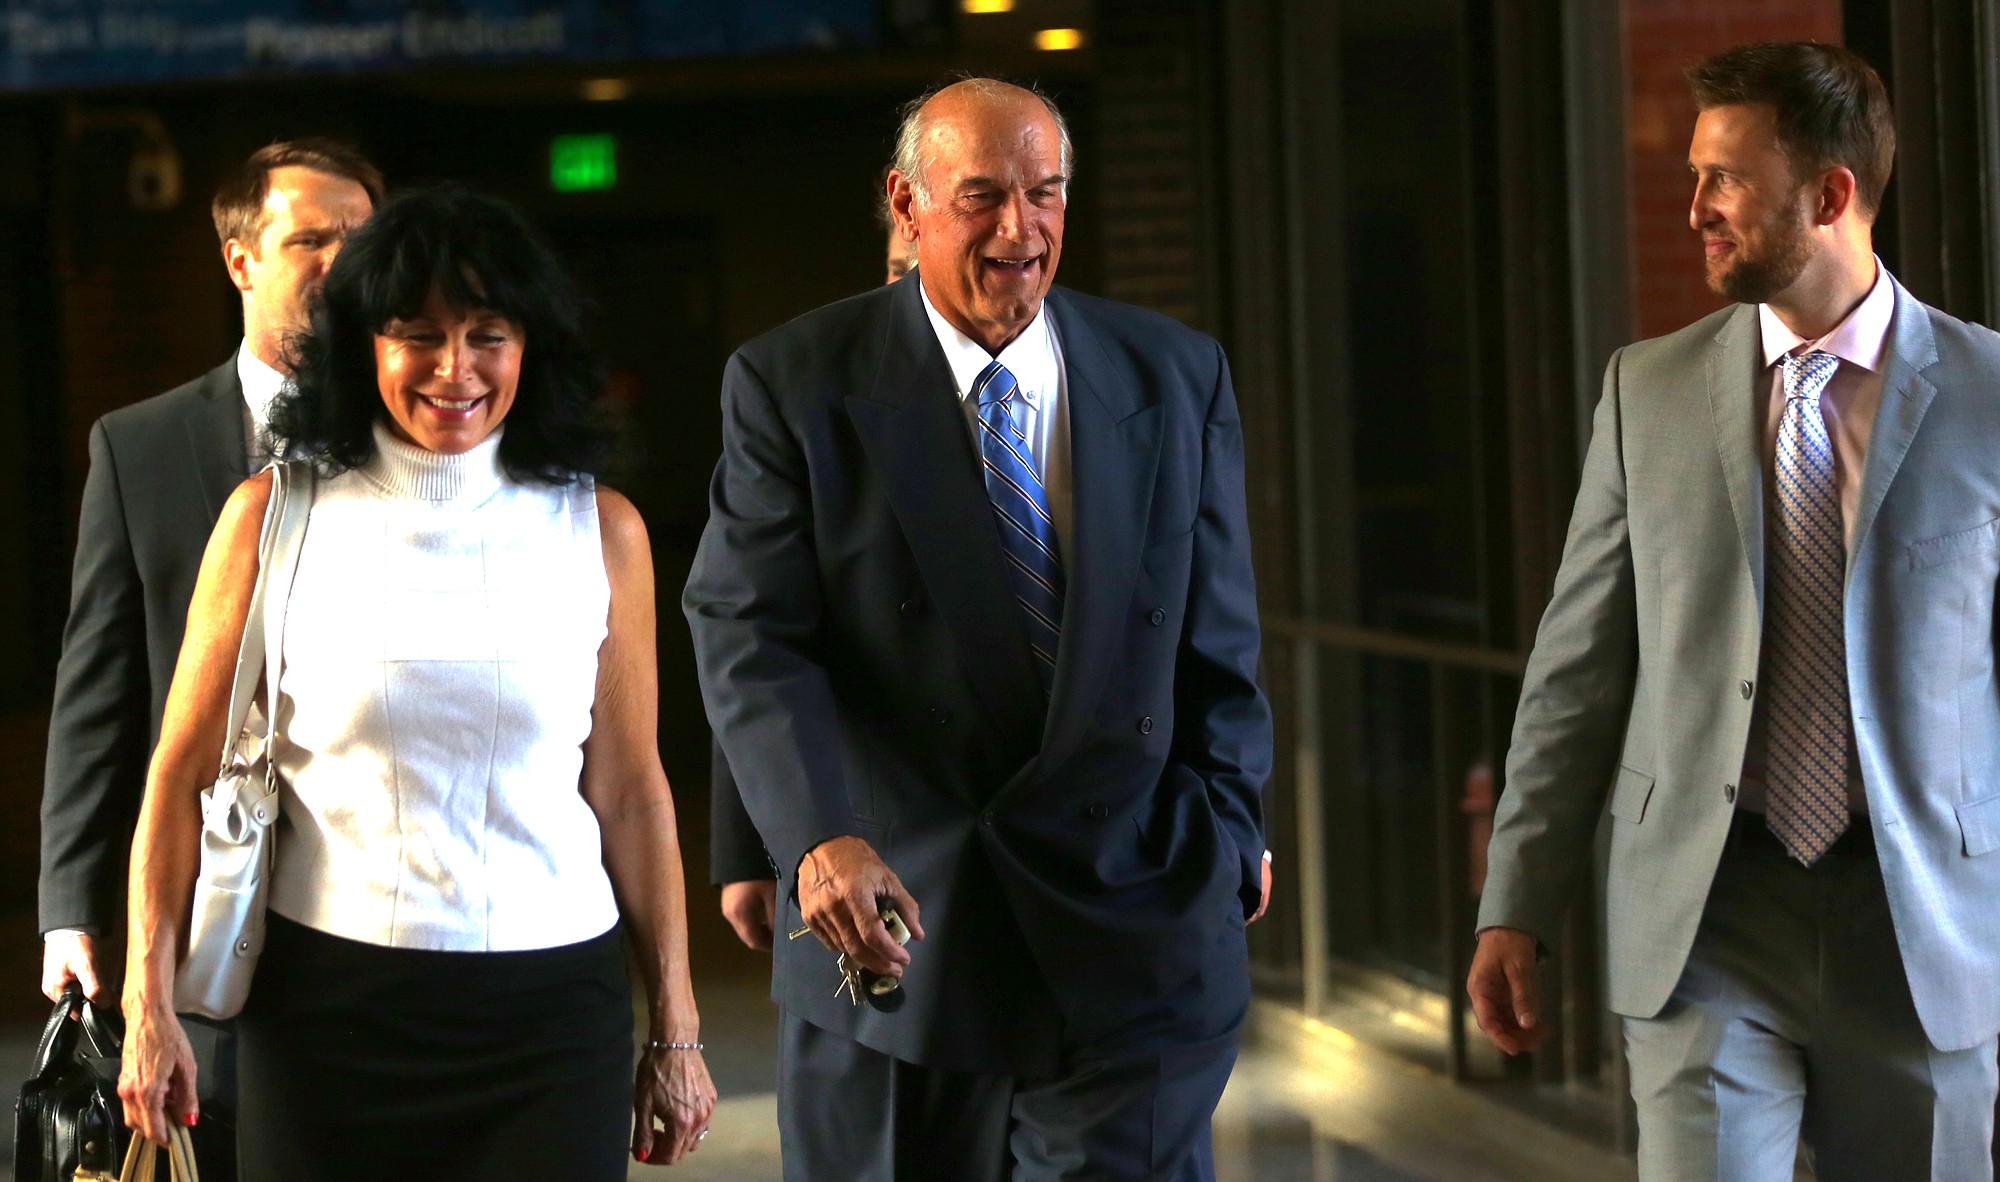 Former Minnesota Gov. Jesse Ventura, center, arrives at court with his wife, Terry, and others for his defamation lawsuit against &quot;American Sniper&quot; author Chris Kyle in St.